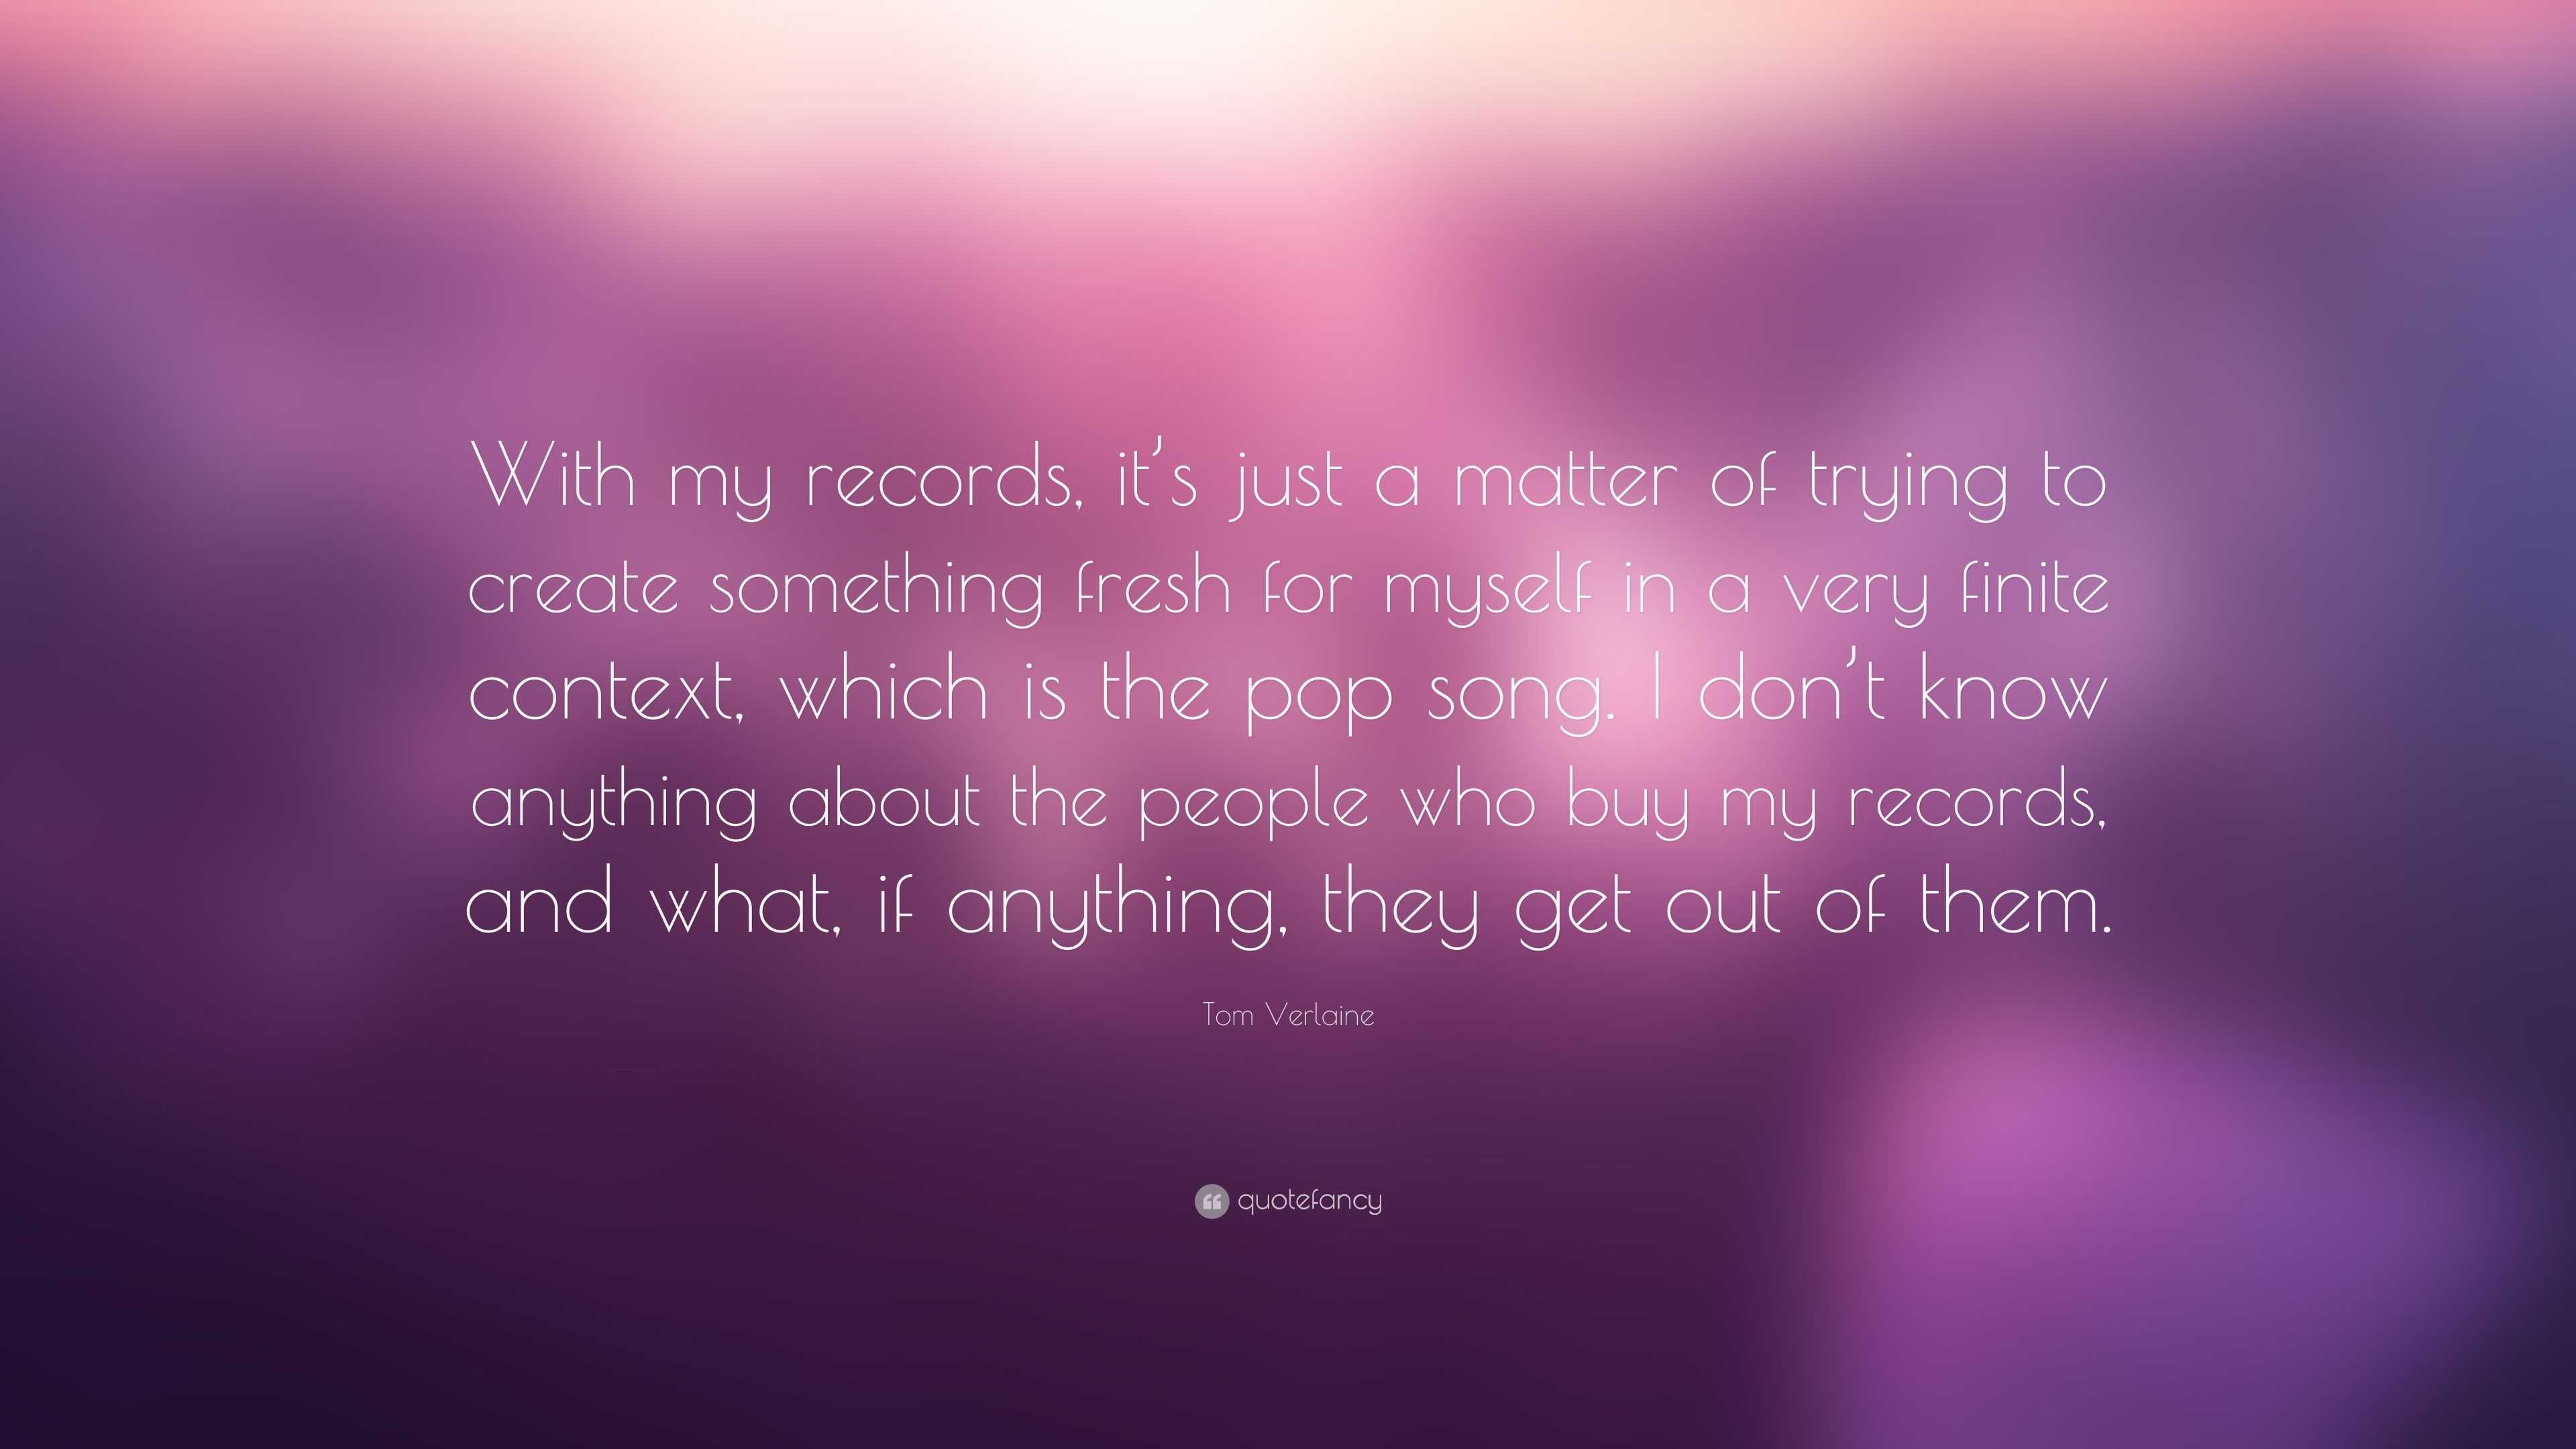 Tom Verlaine Quote: “With my records, it’s just a matter of trying to ...